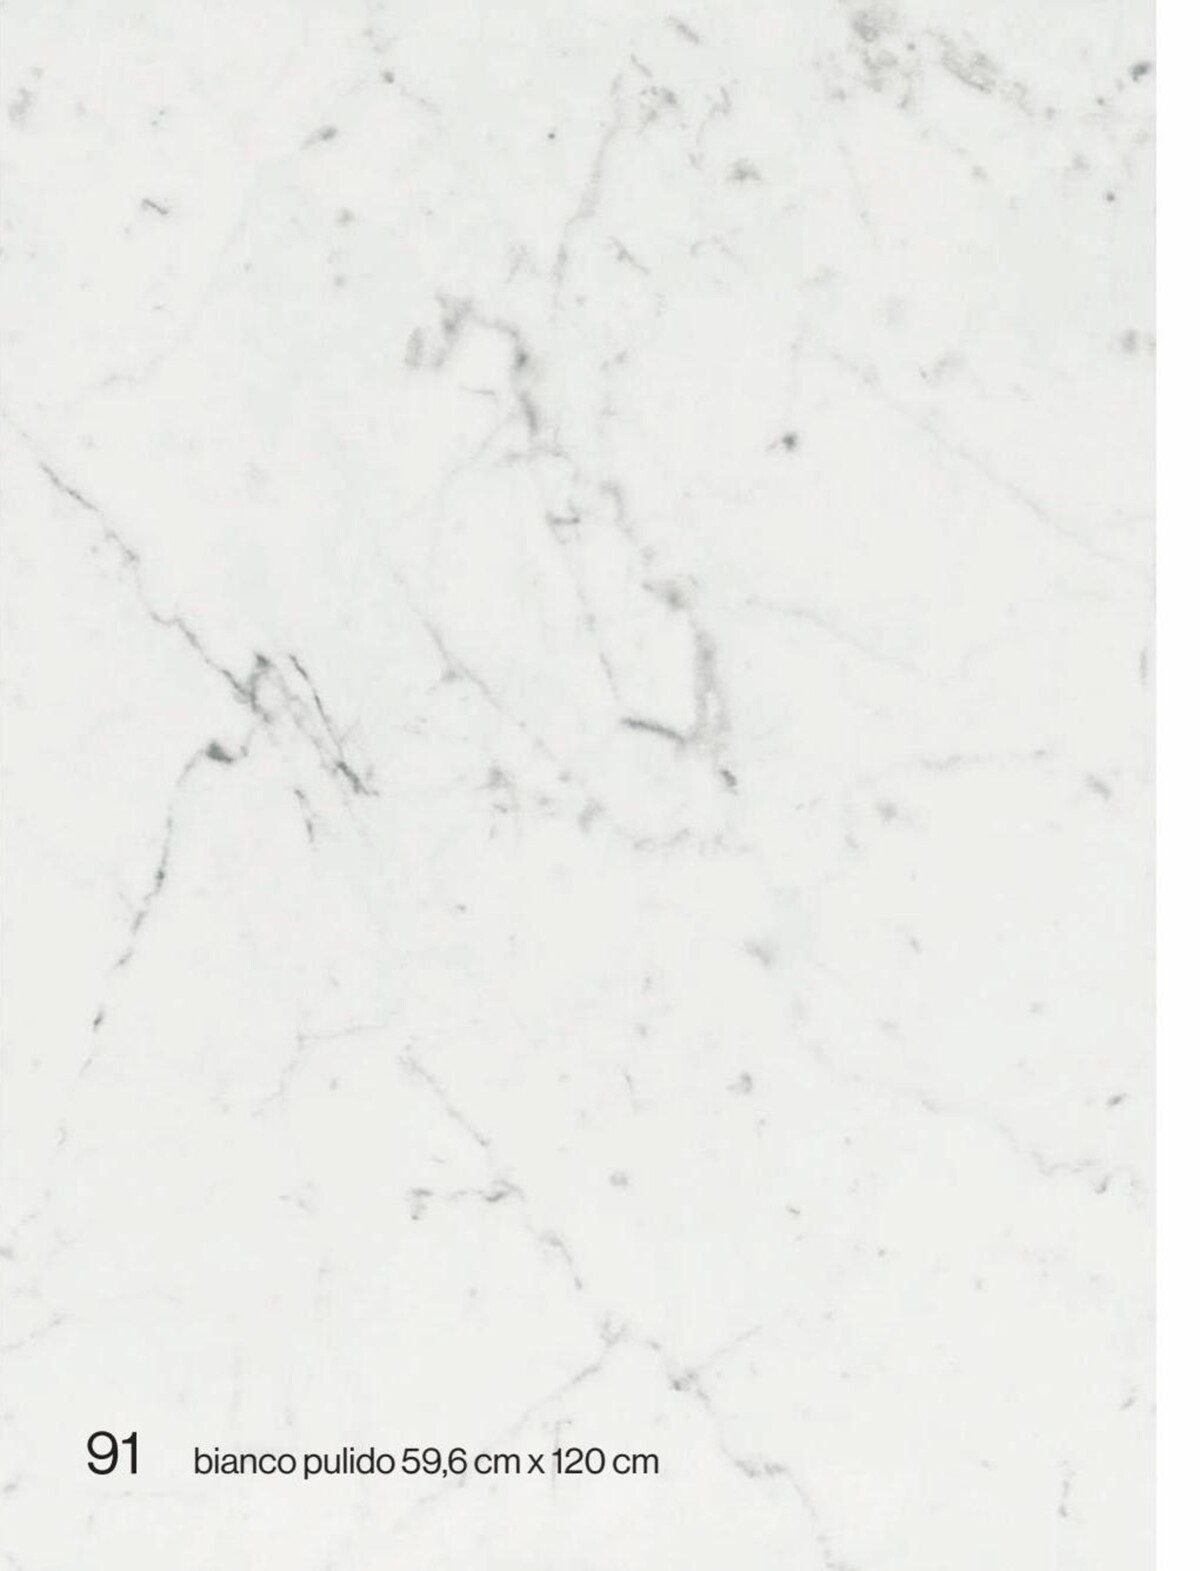 Catalogue MARMI,a ceramic tile that echoes the purity of marble, page 00091